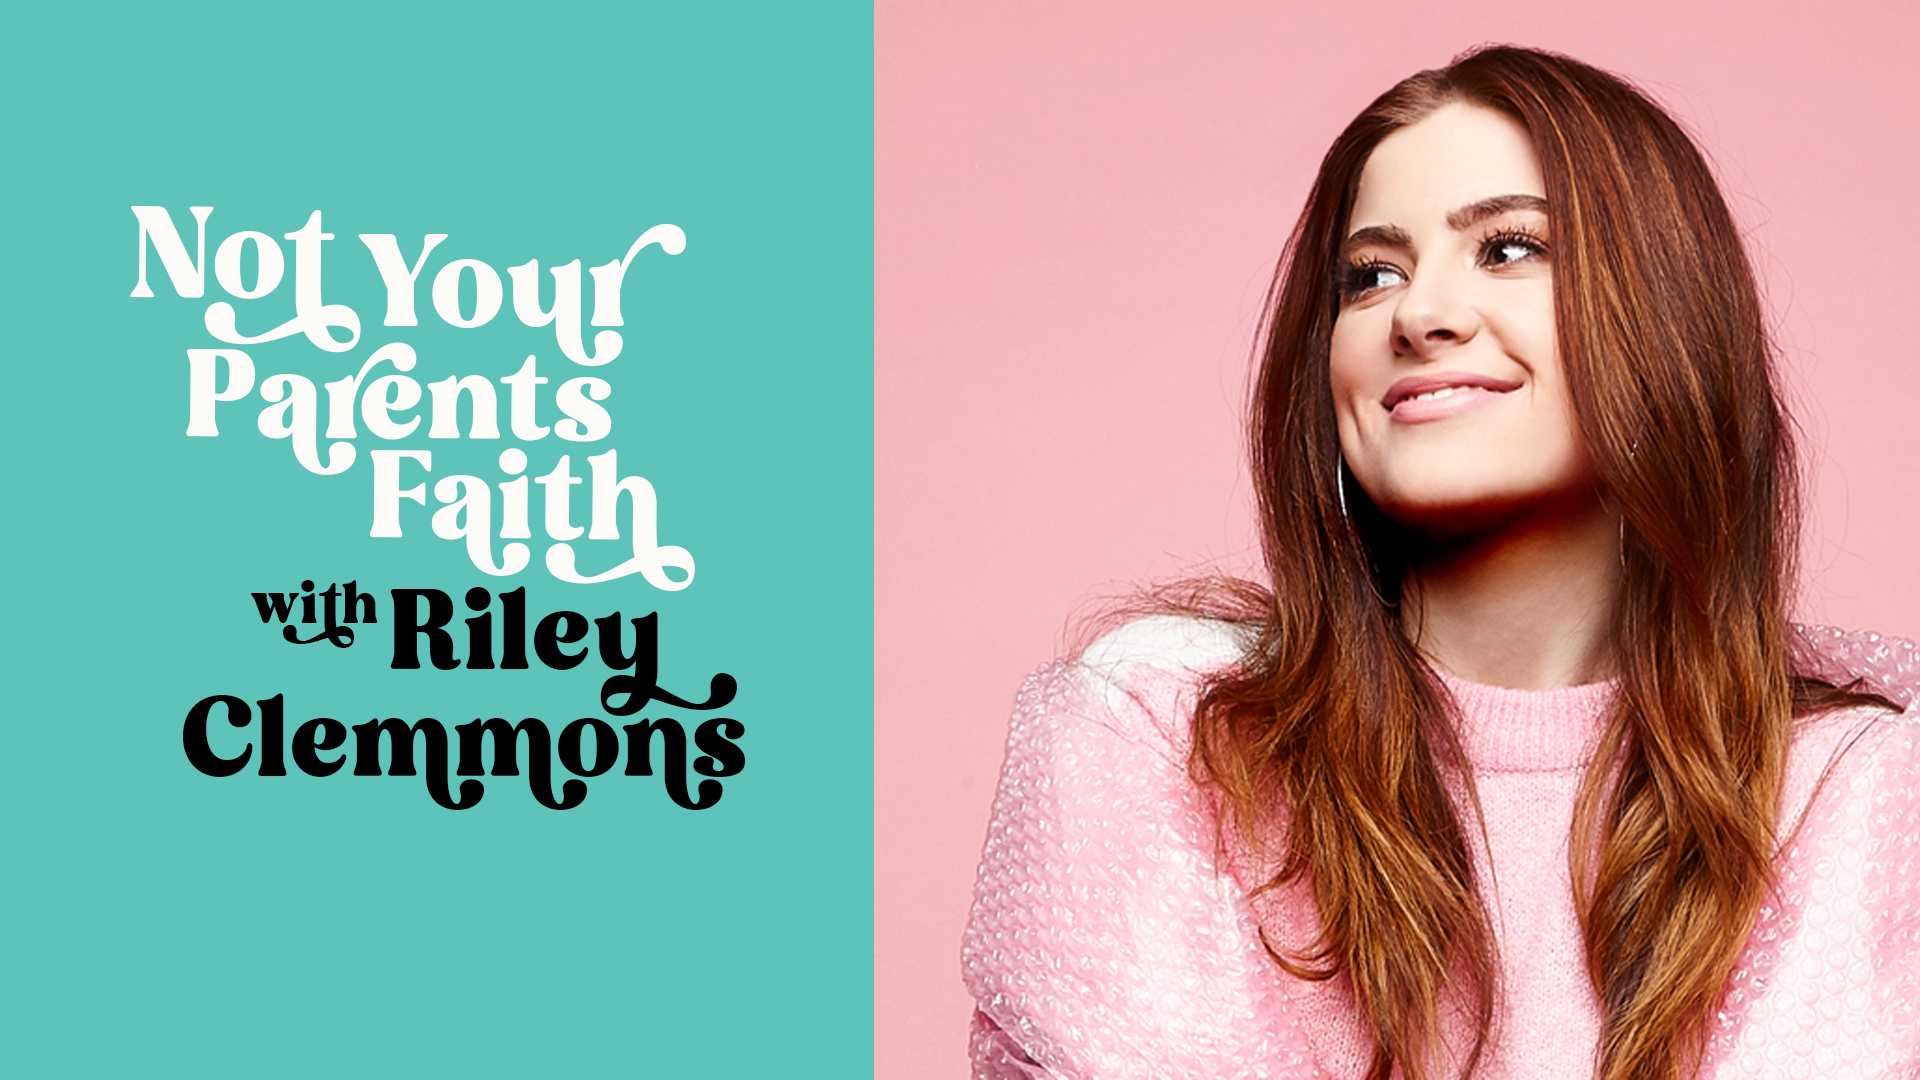 Not your parents faith with Riley Clemmons